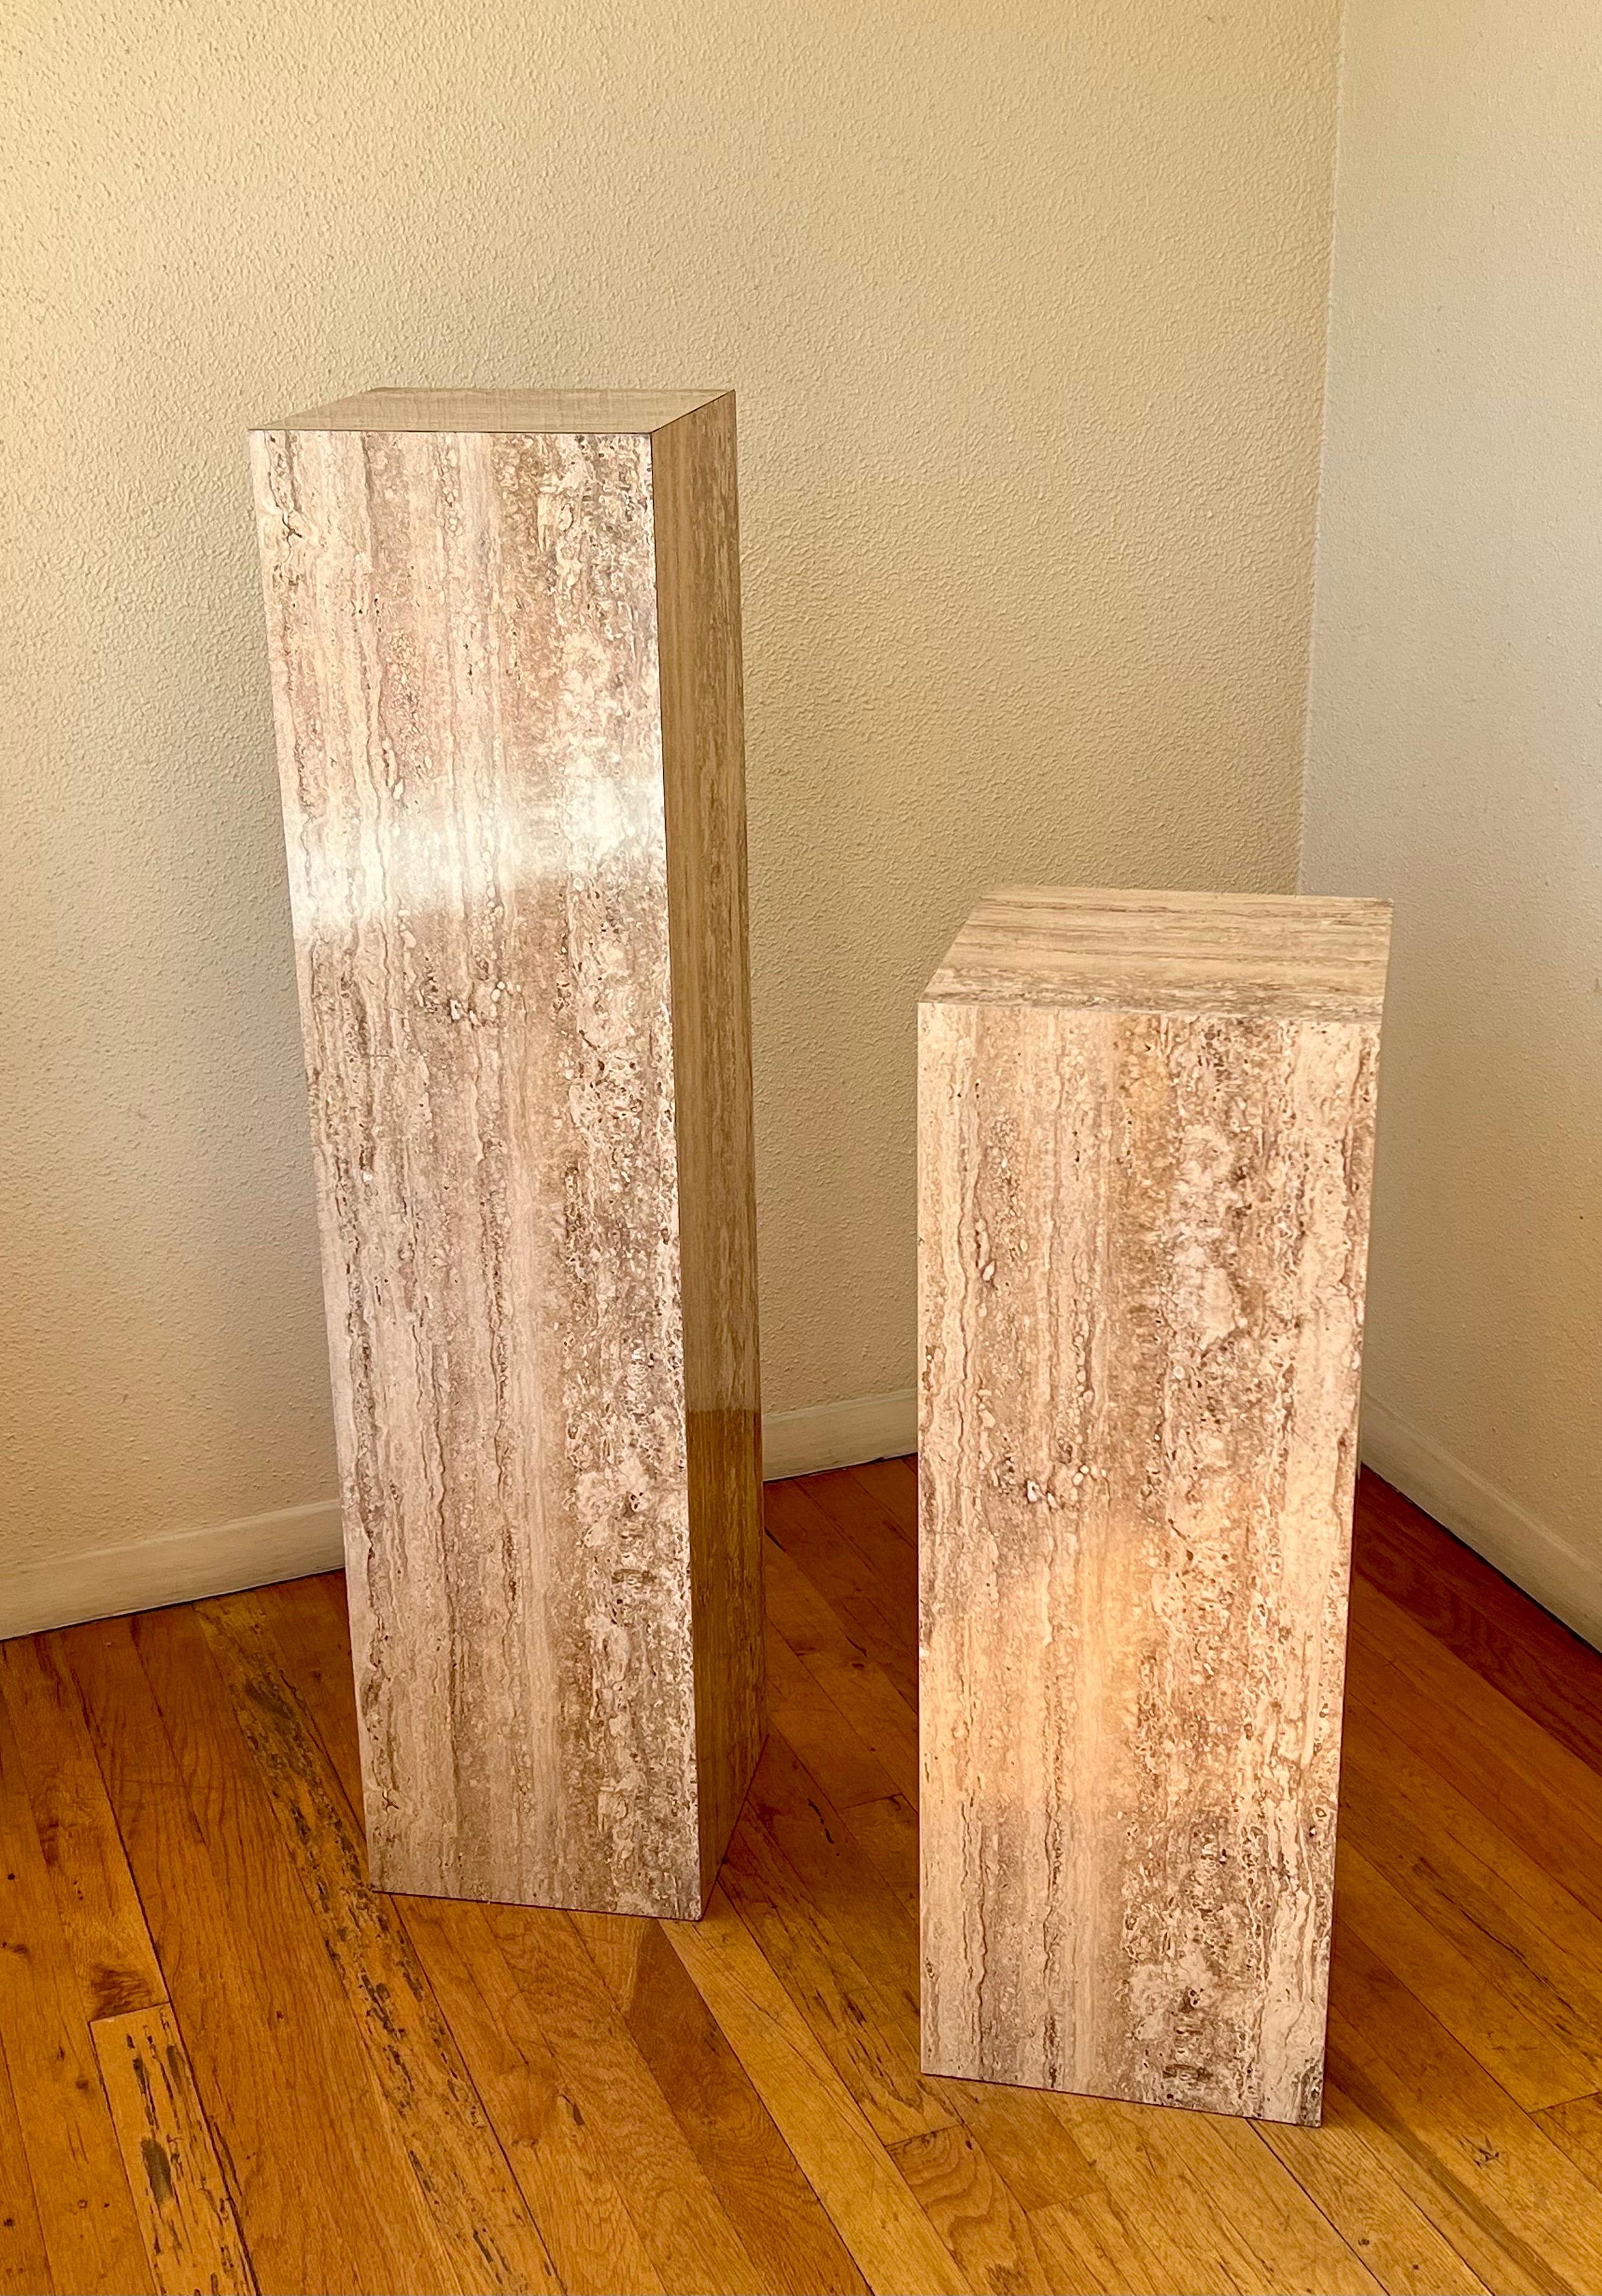 American Pair of Faux Travertine Laminate Pedestals by Austin Productions, Circa 1980's